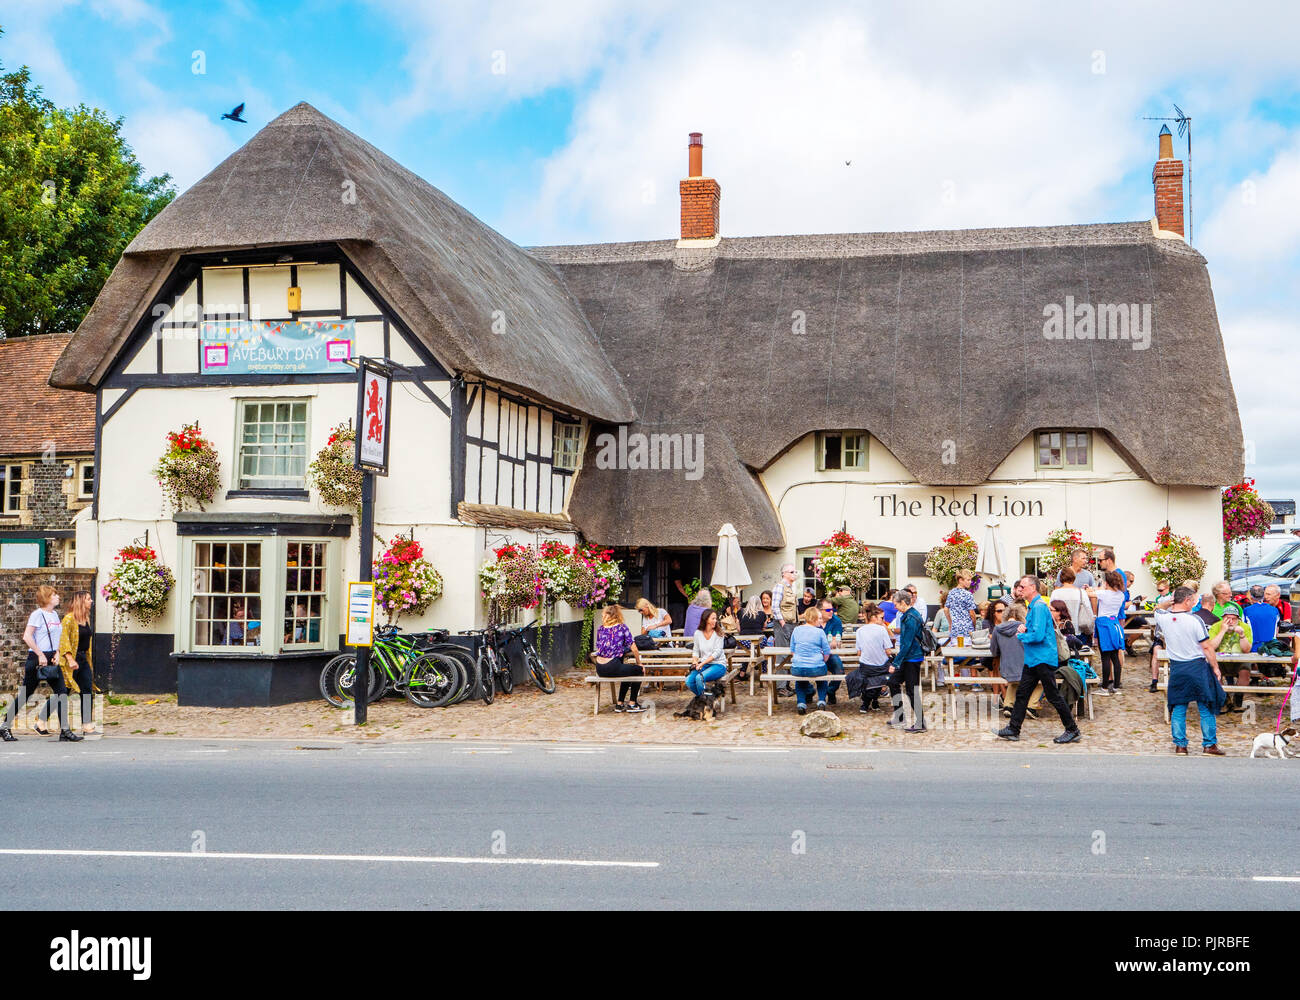 The popular Red Lion pub at Avebury neolithic henge in Wiltshire UK which contains a village with pub and three stone circles within its circumference Stock Photo